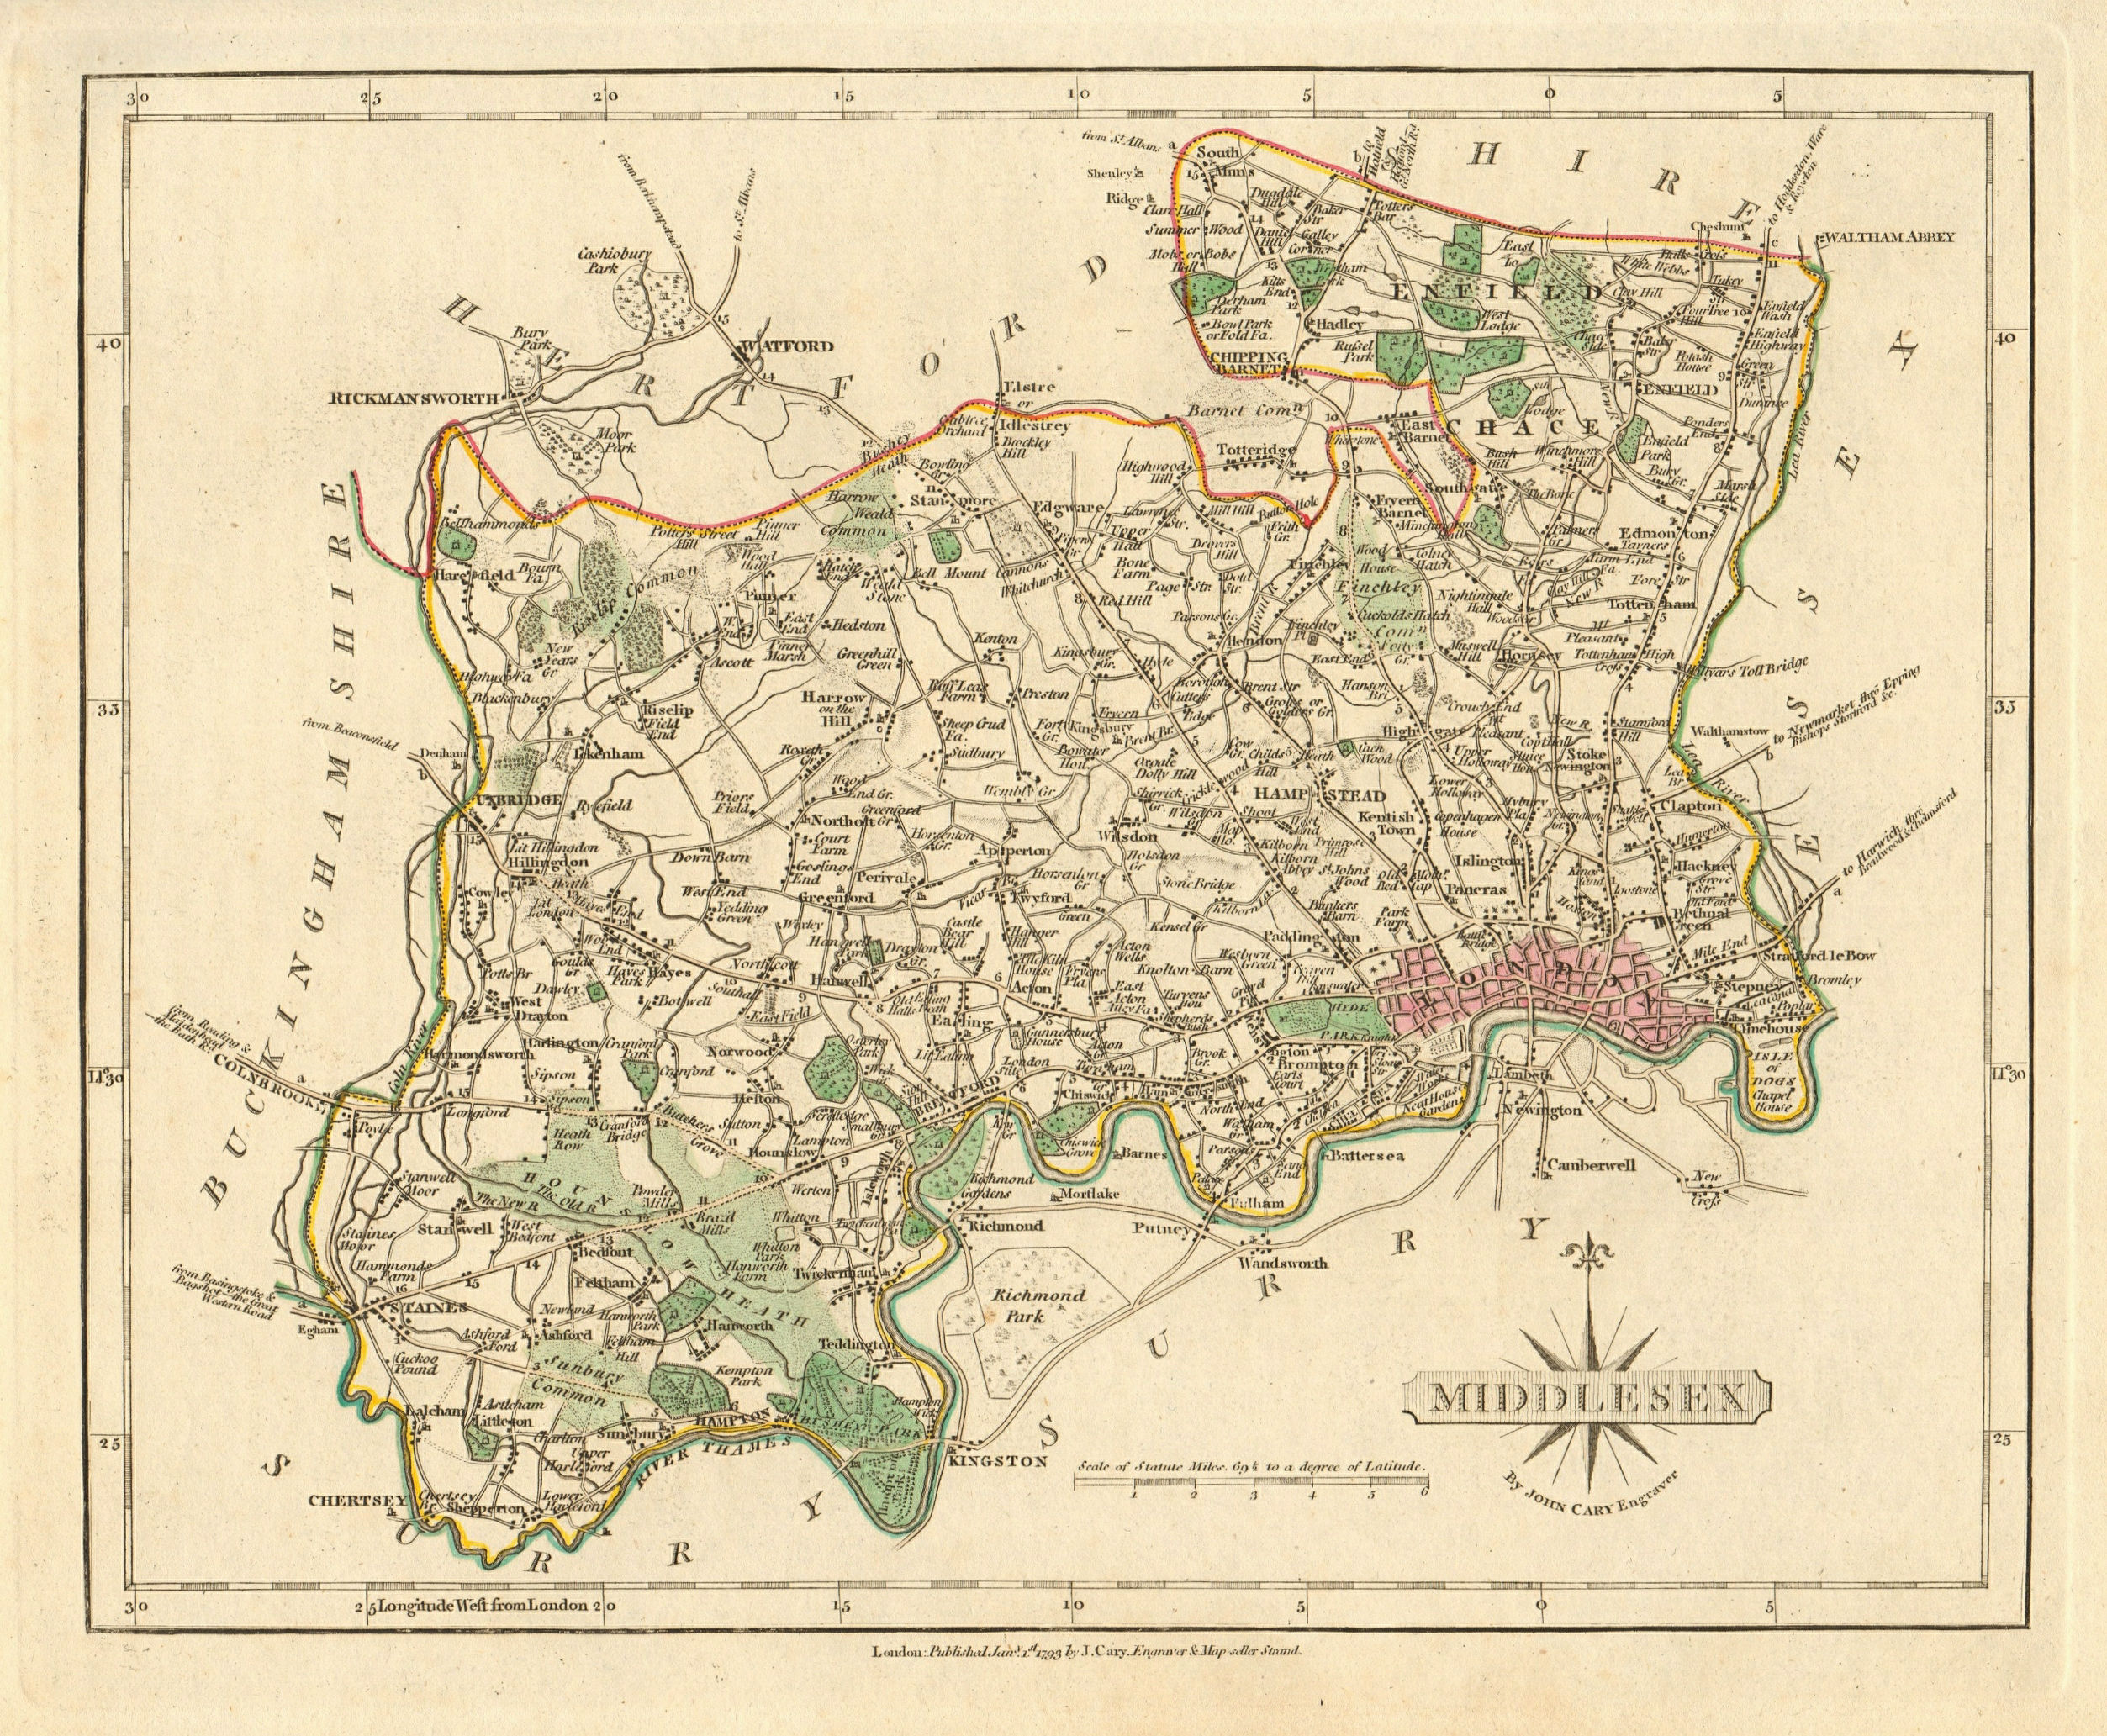 Associate Product Antique county map of MIDDLESEX by JOHN CARY. Original outline colour 1793